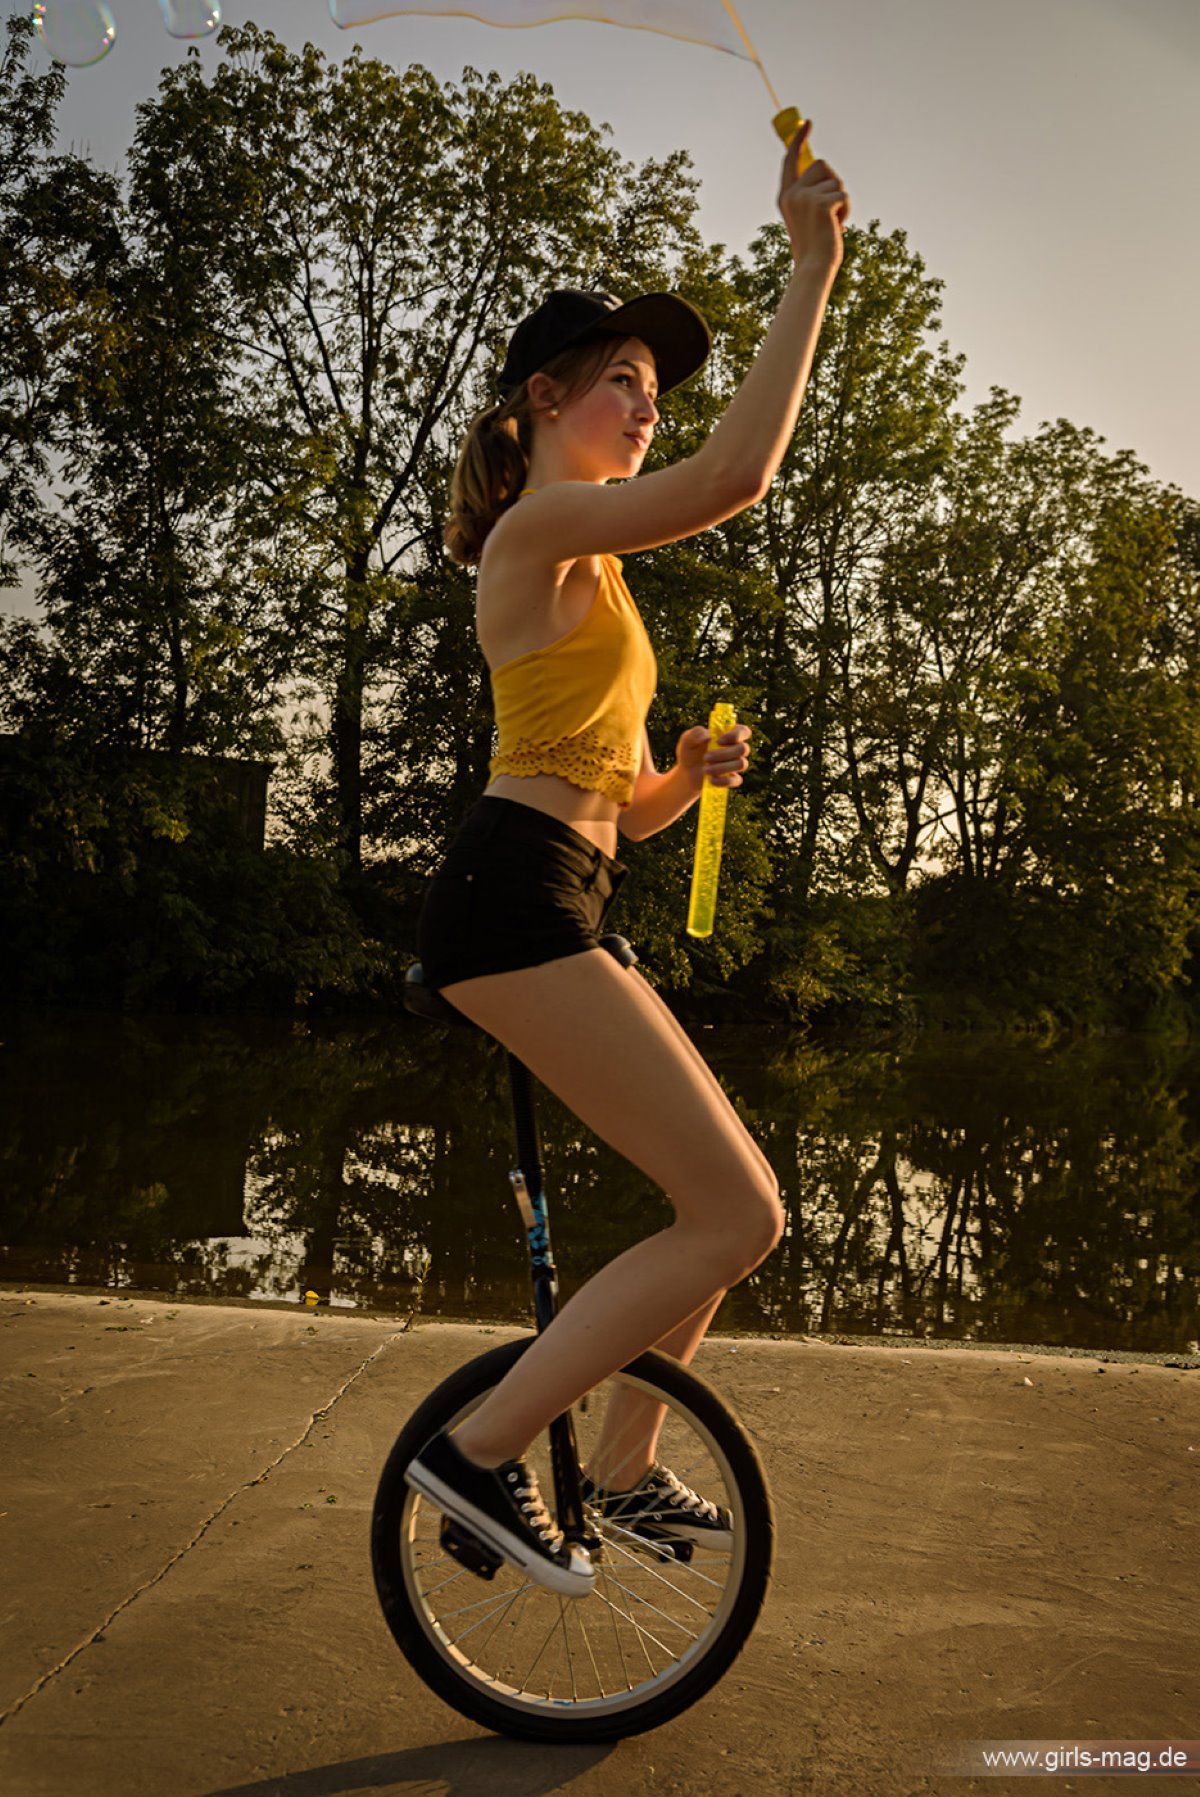 Girls Mag Annika Bubbles on a Unicycle 0116 4783428708.jpg